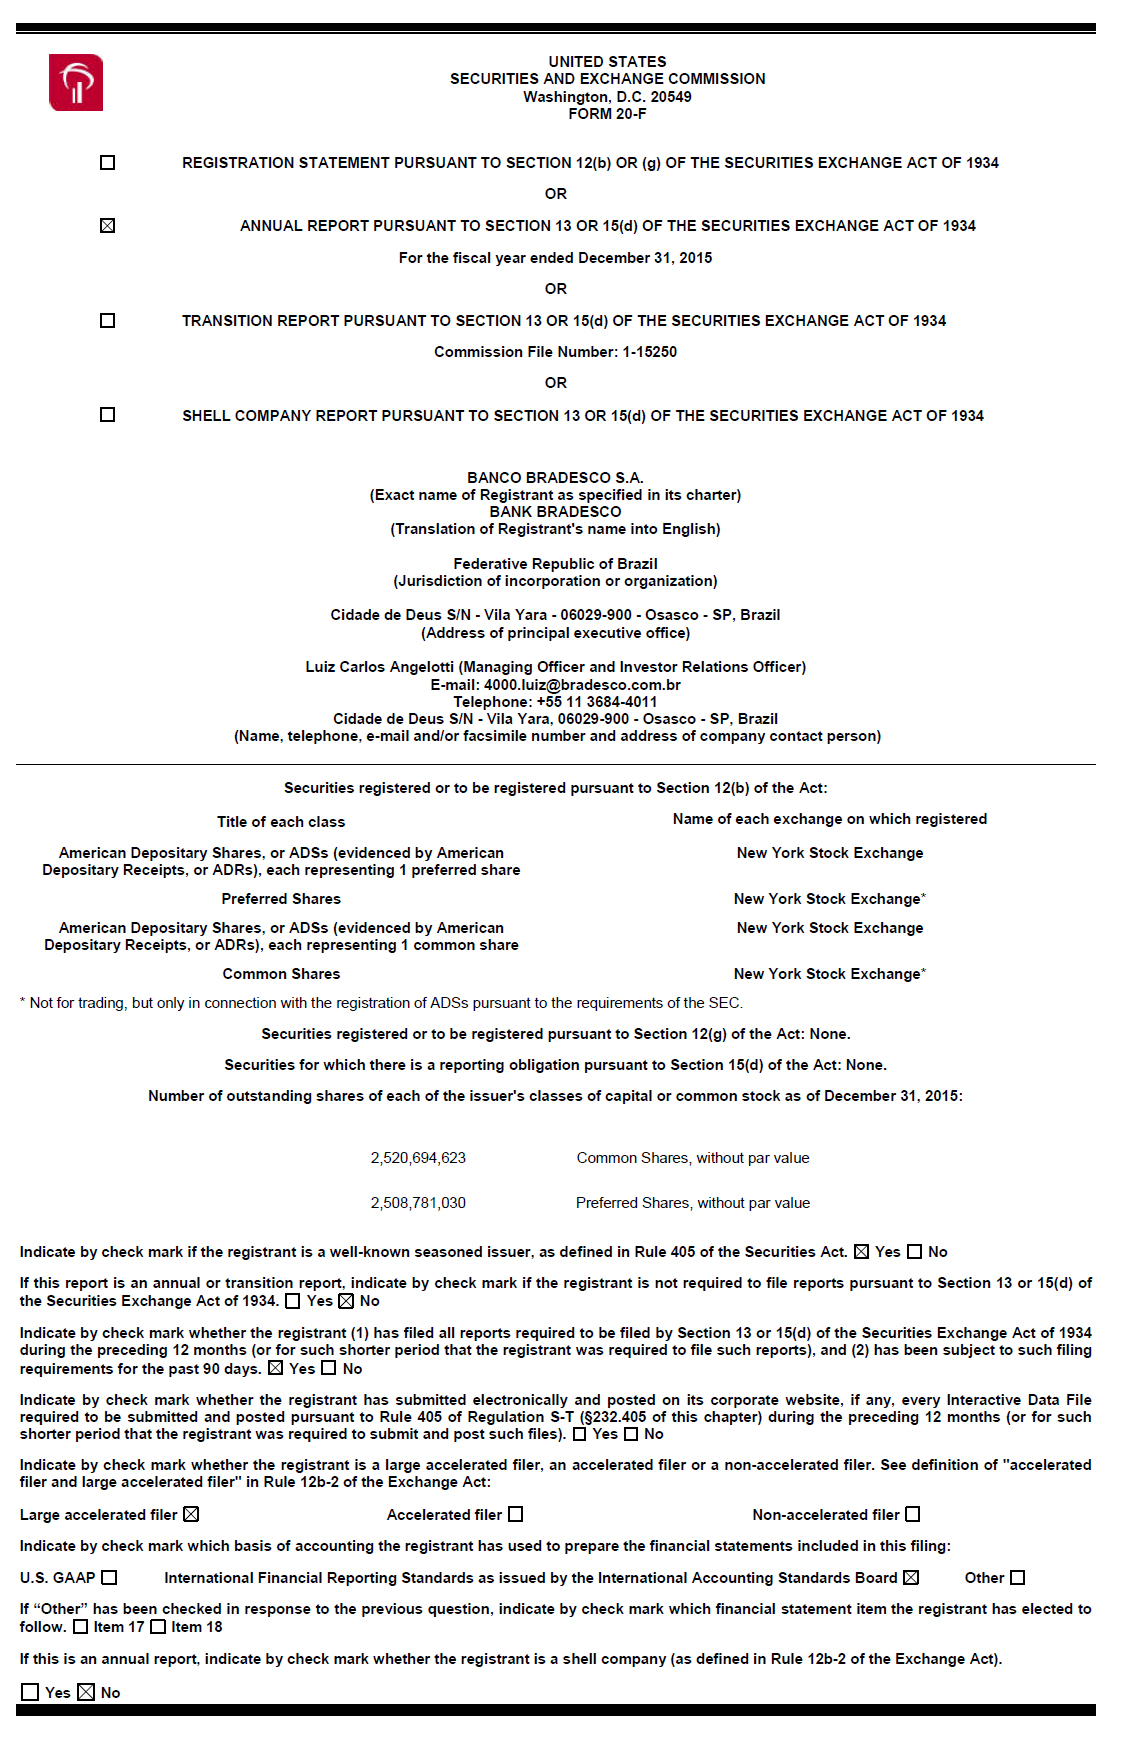 bbdform20f_2015.htm - Generated by SEC Publisher for SEC Filing